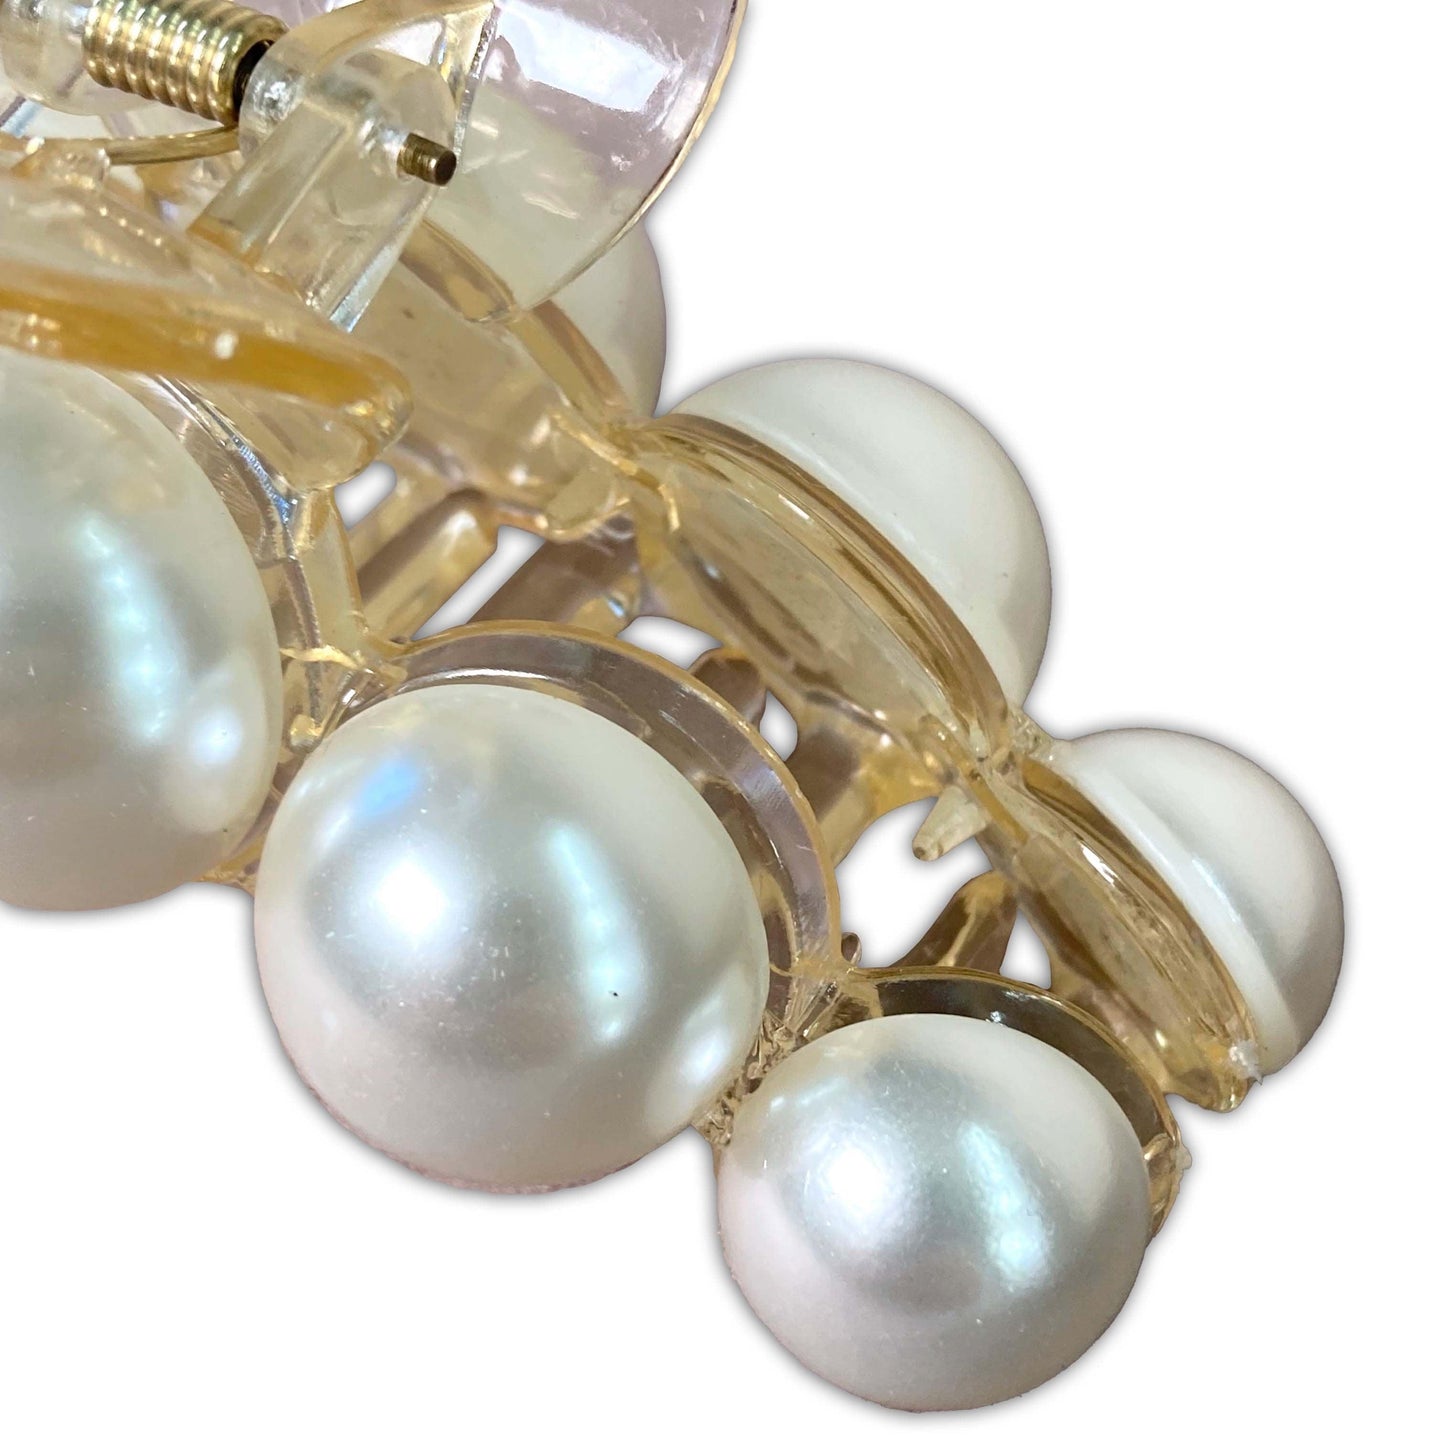 Luxury pearl embellished hair clip close up of the reflective pearls